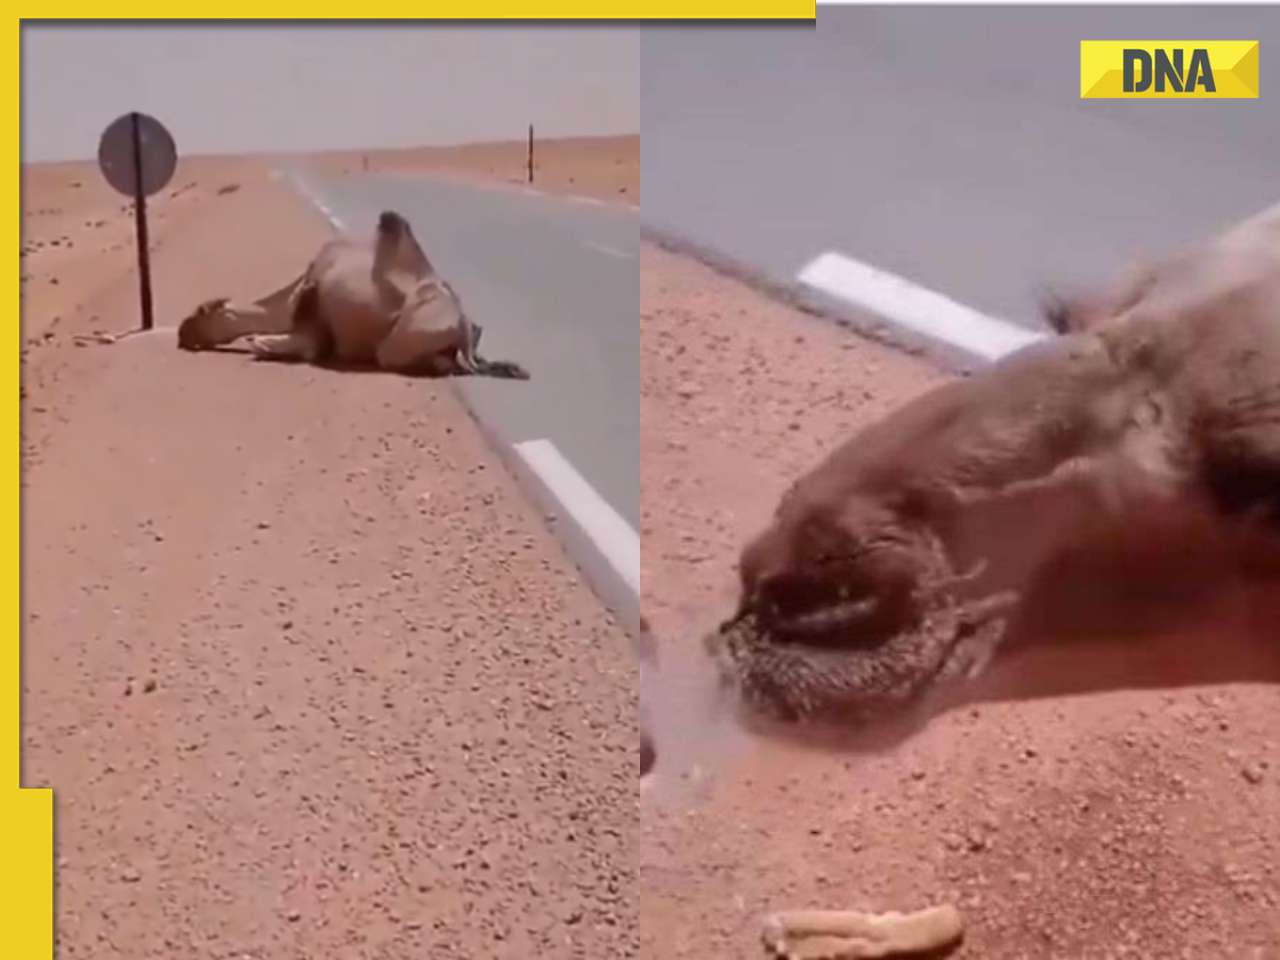 Man offers water to thirsty camel in scorching desert, viral video wins hearts